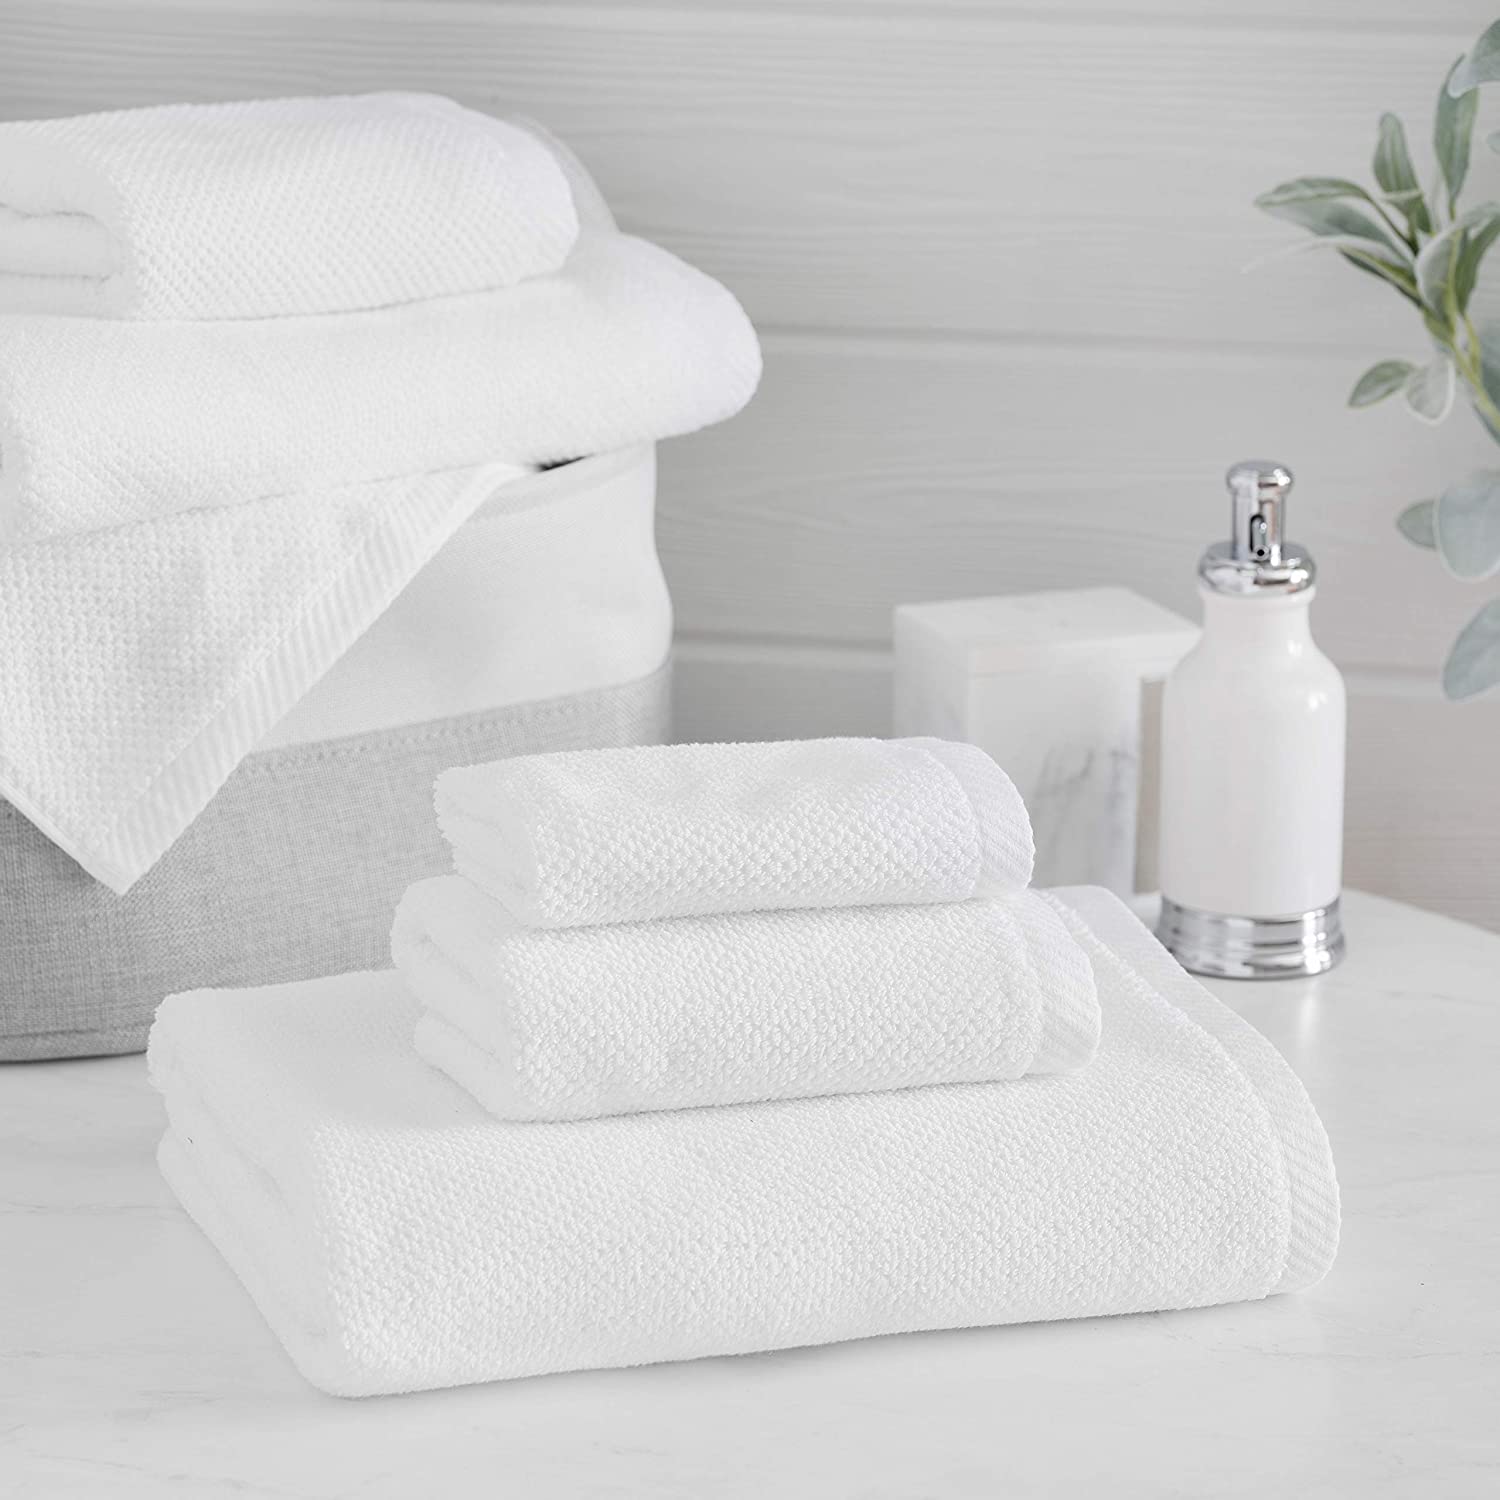 6-Piece Luxury Bath Towel Set: Includes 2 Bath Towels, 2 Hand Towels & 2  Washcloths. Made from 100% Soft Cotton